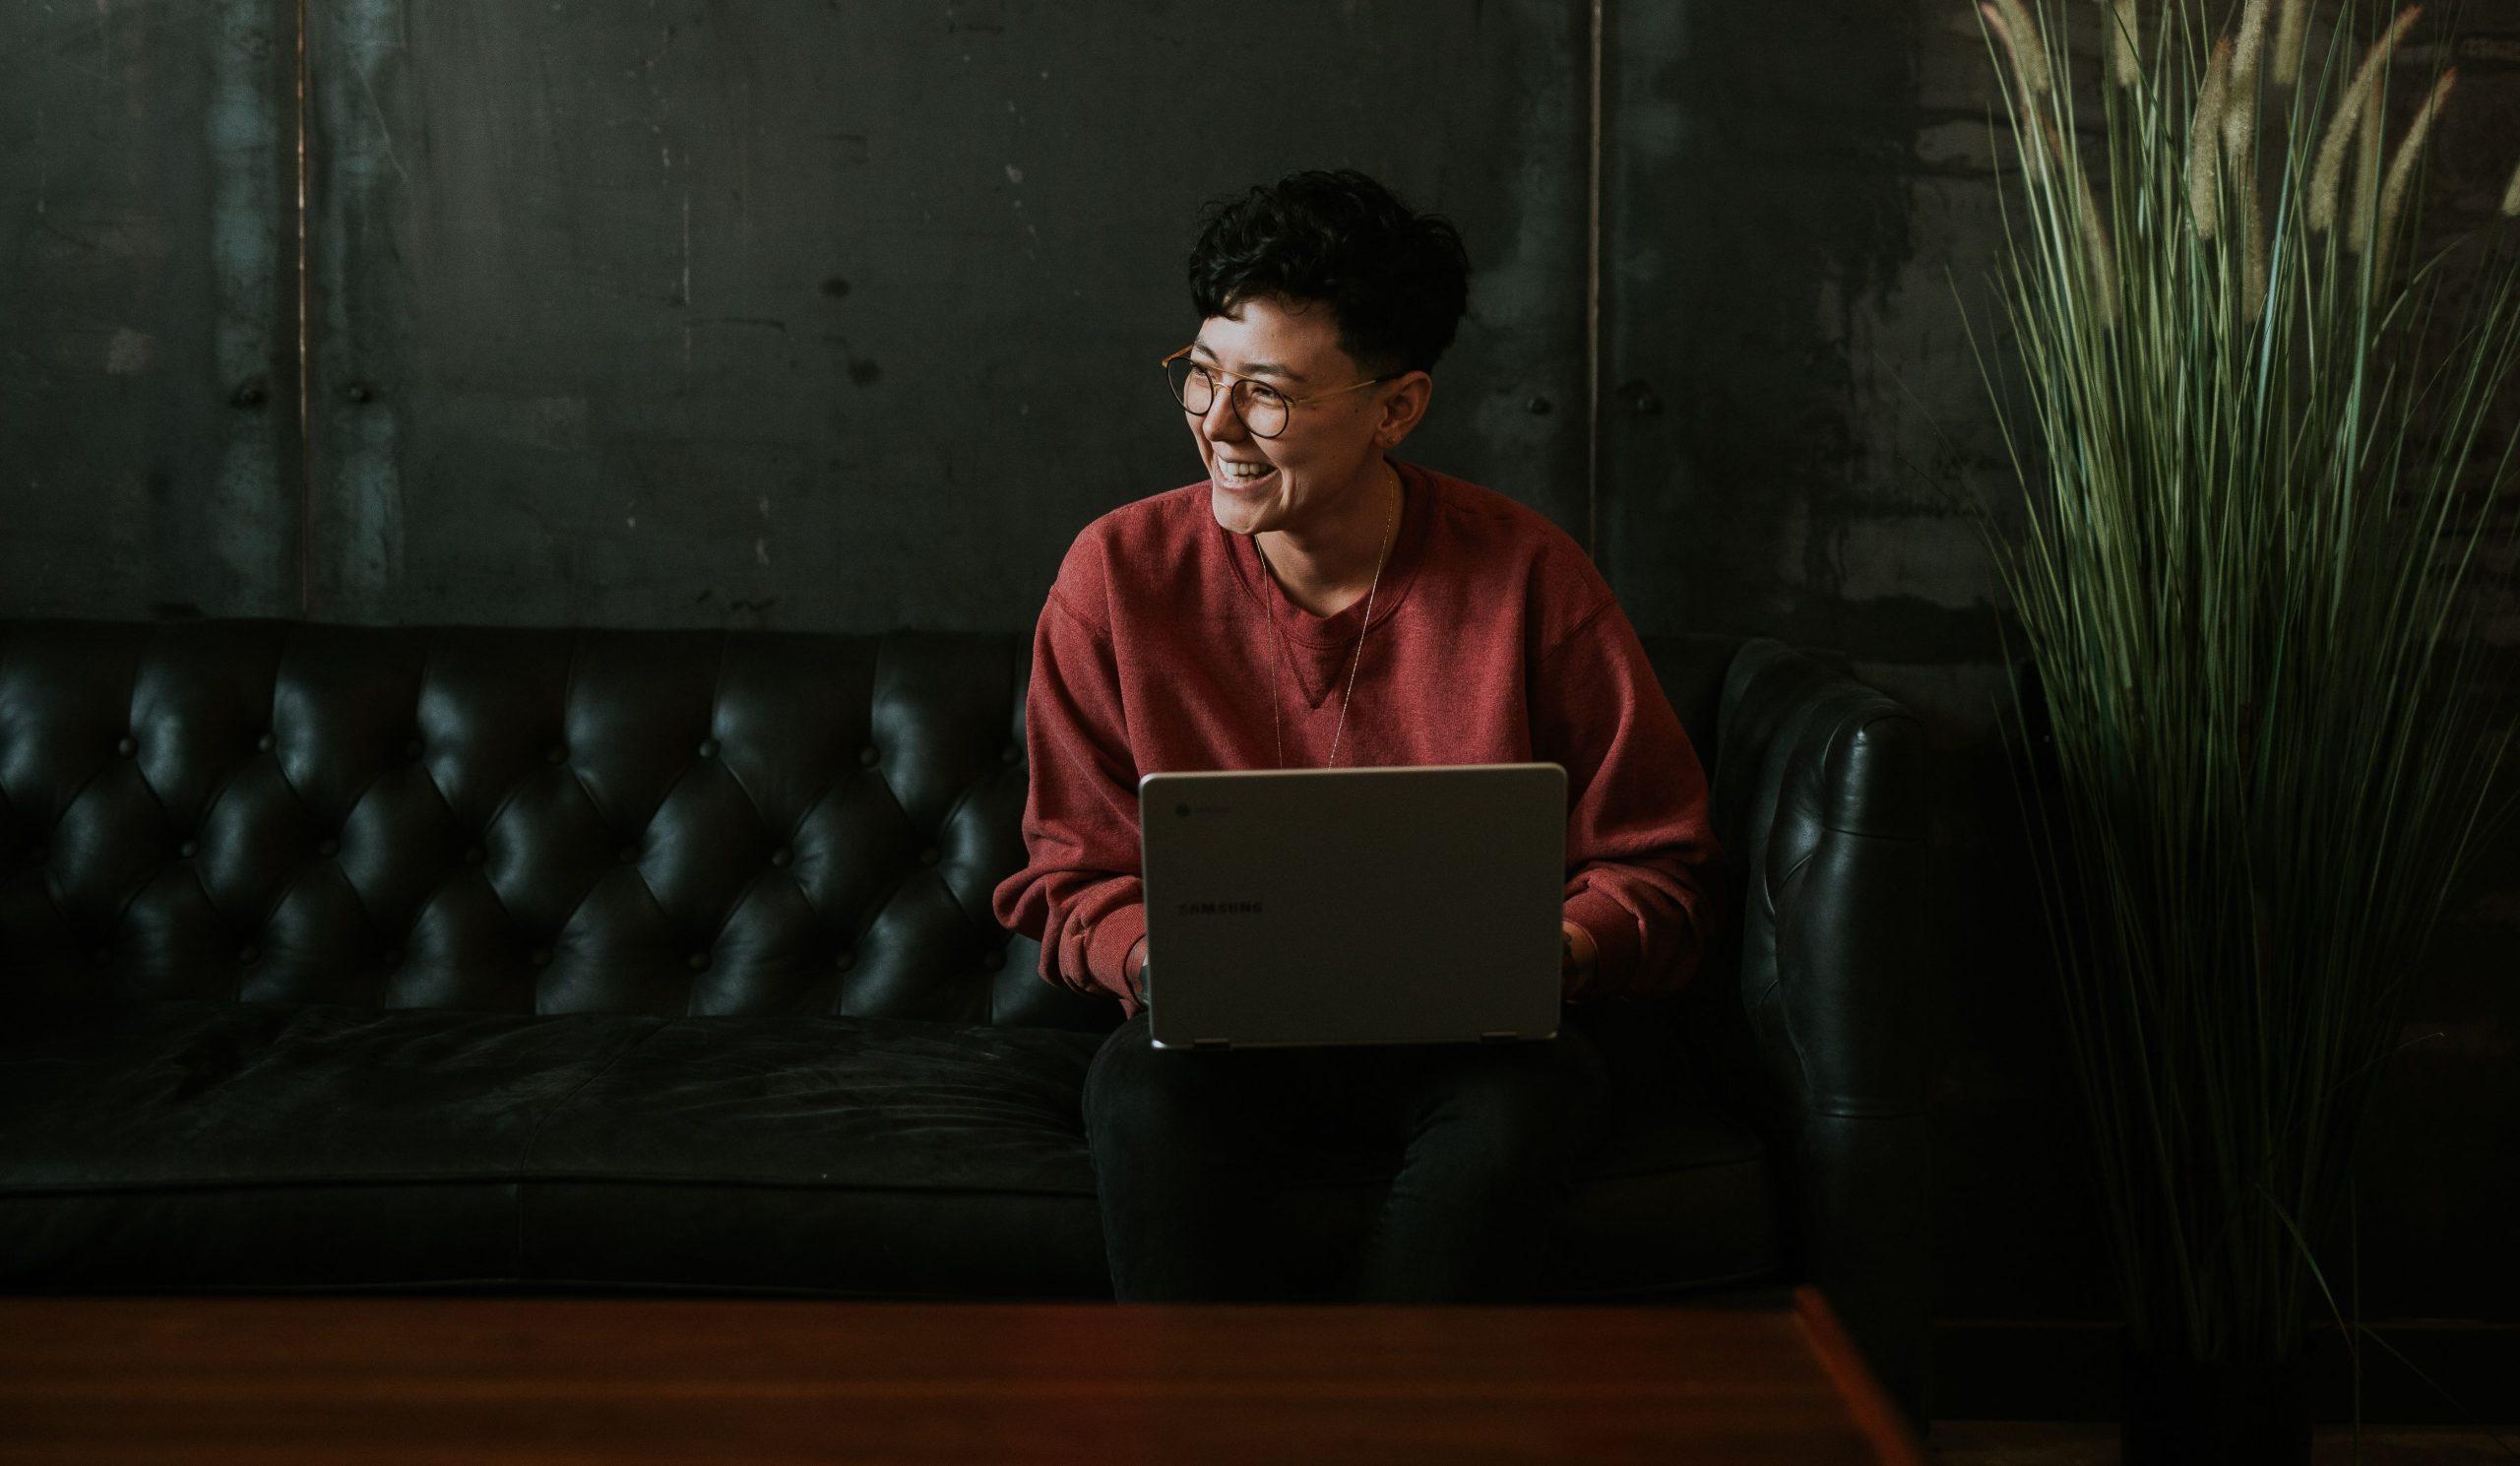 Woman smiling while sitting on couch with laptop in front of her.